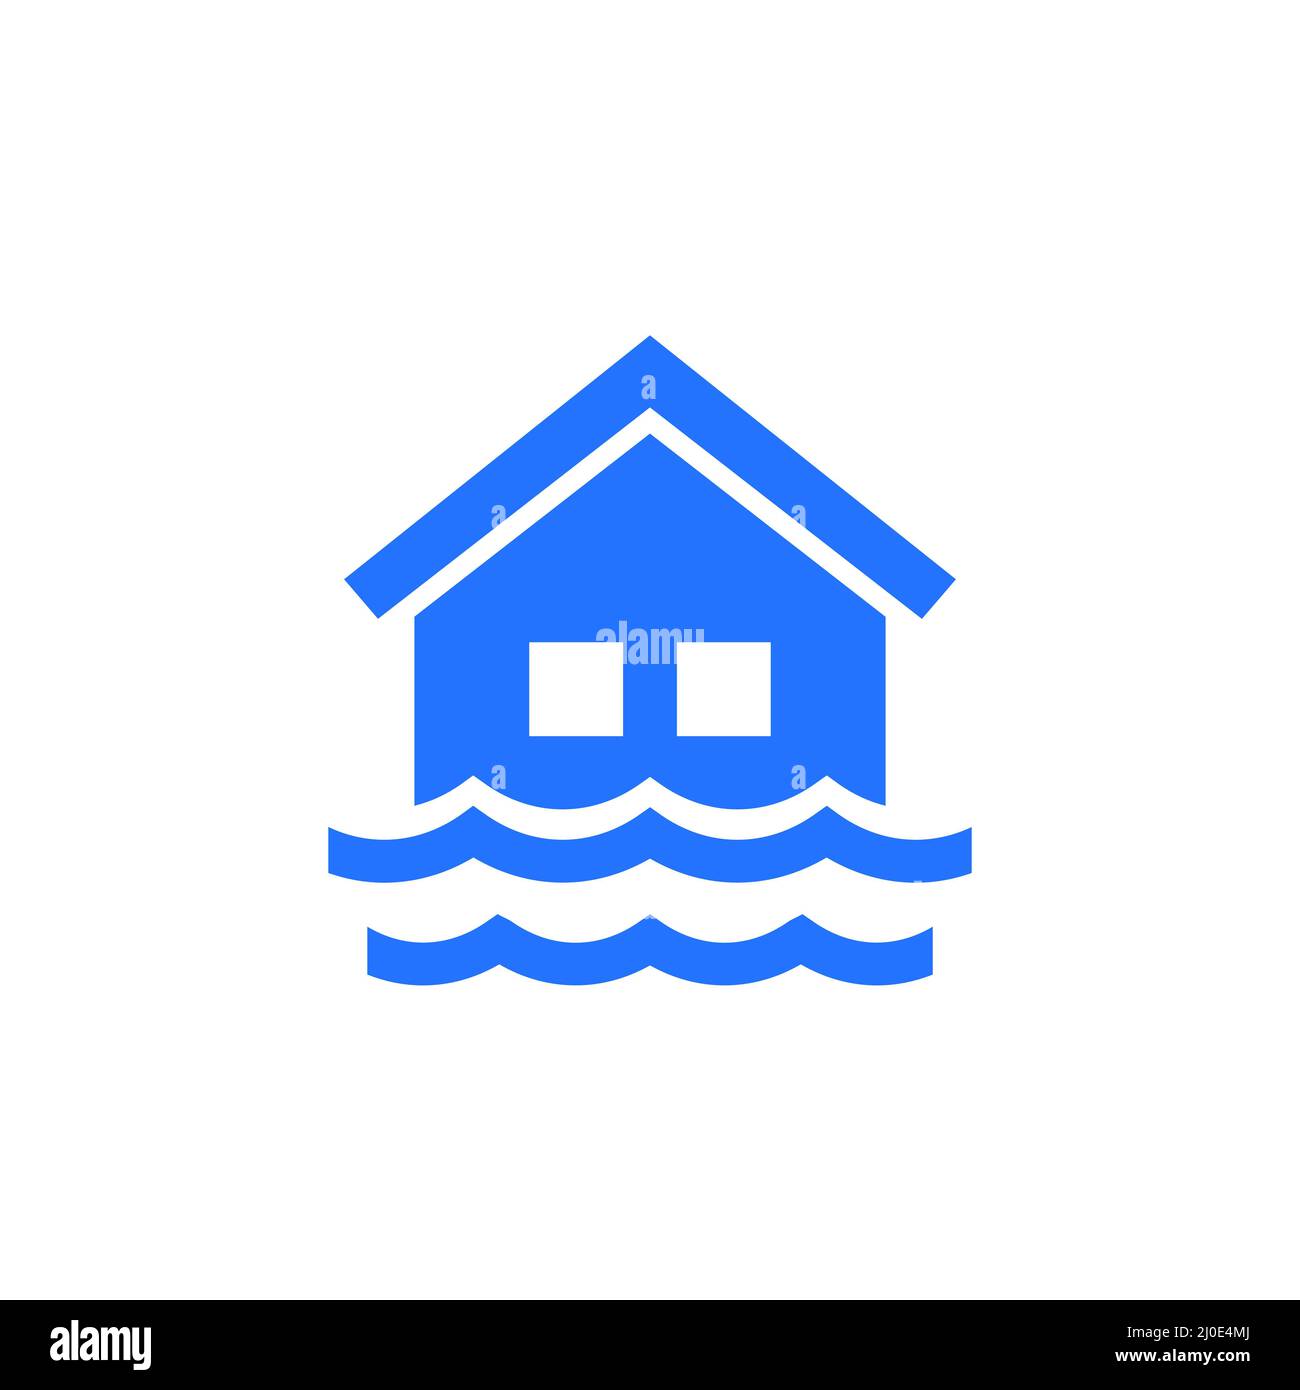 Flood icon with a house Stock Vector